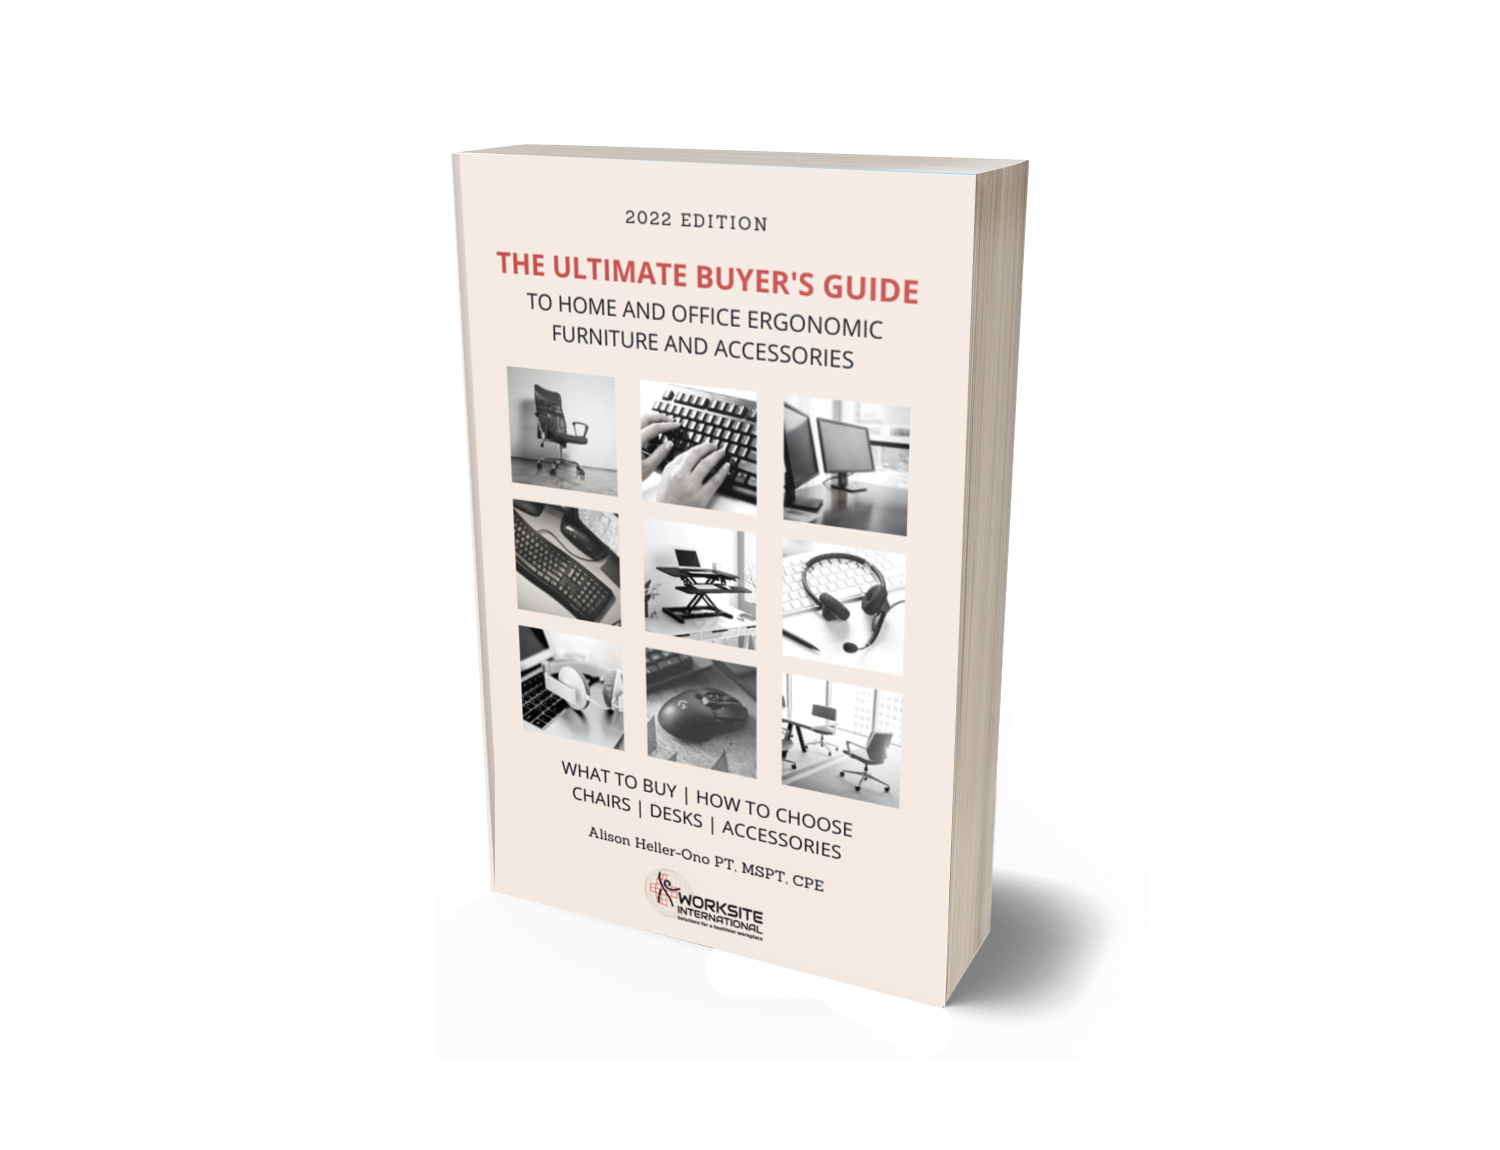 Read: The 2022 Ultimate Buyer's Guide is Here